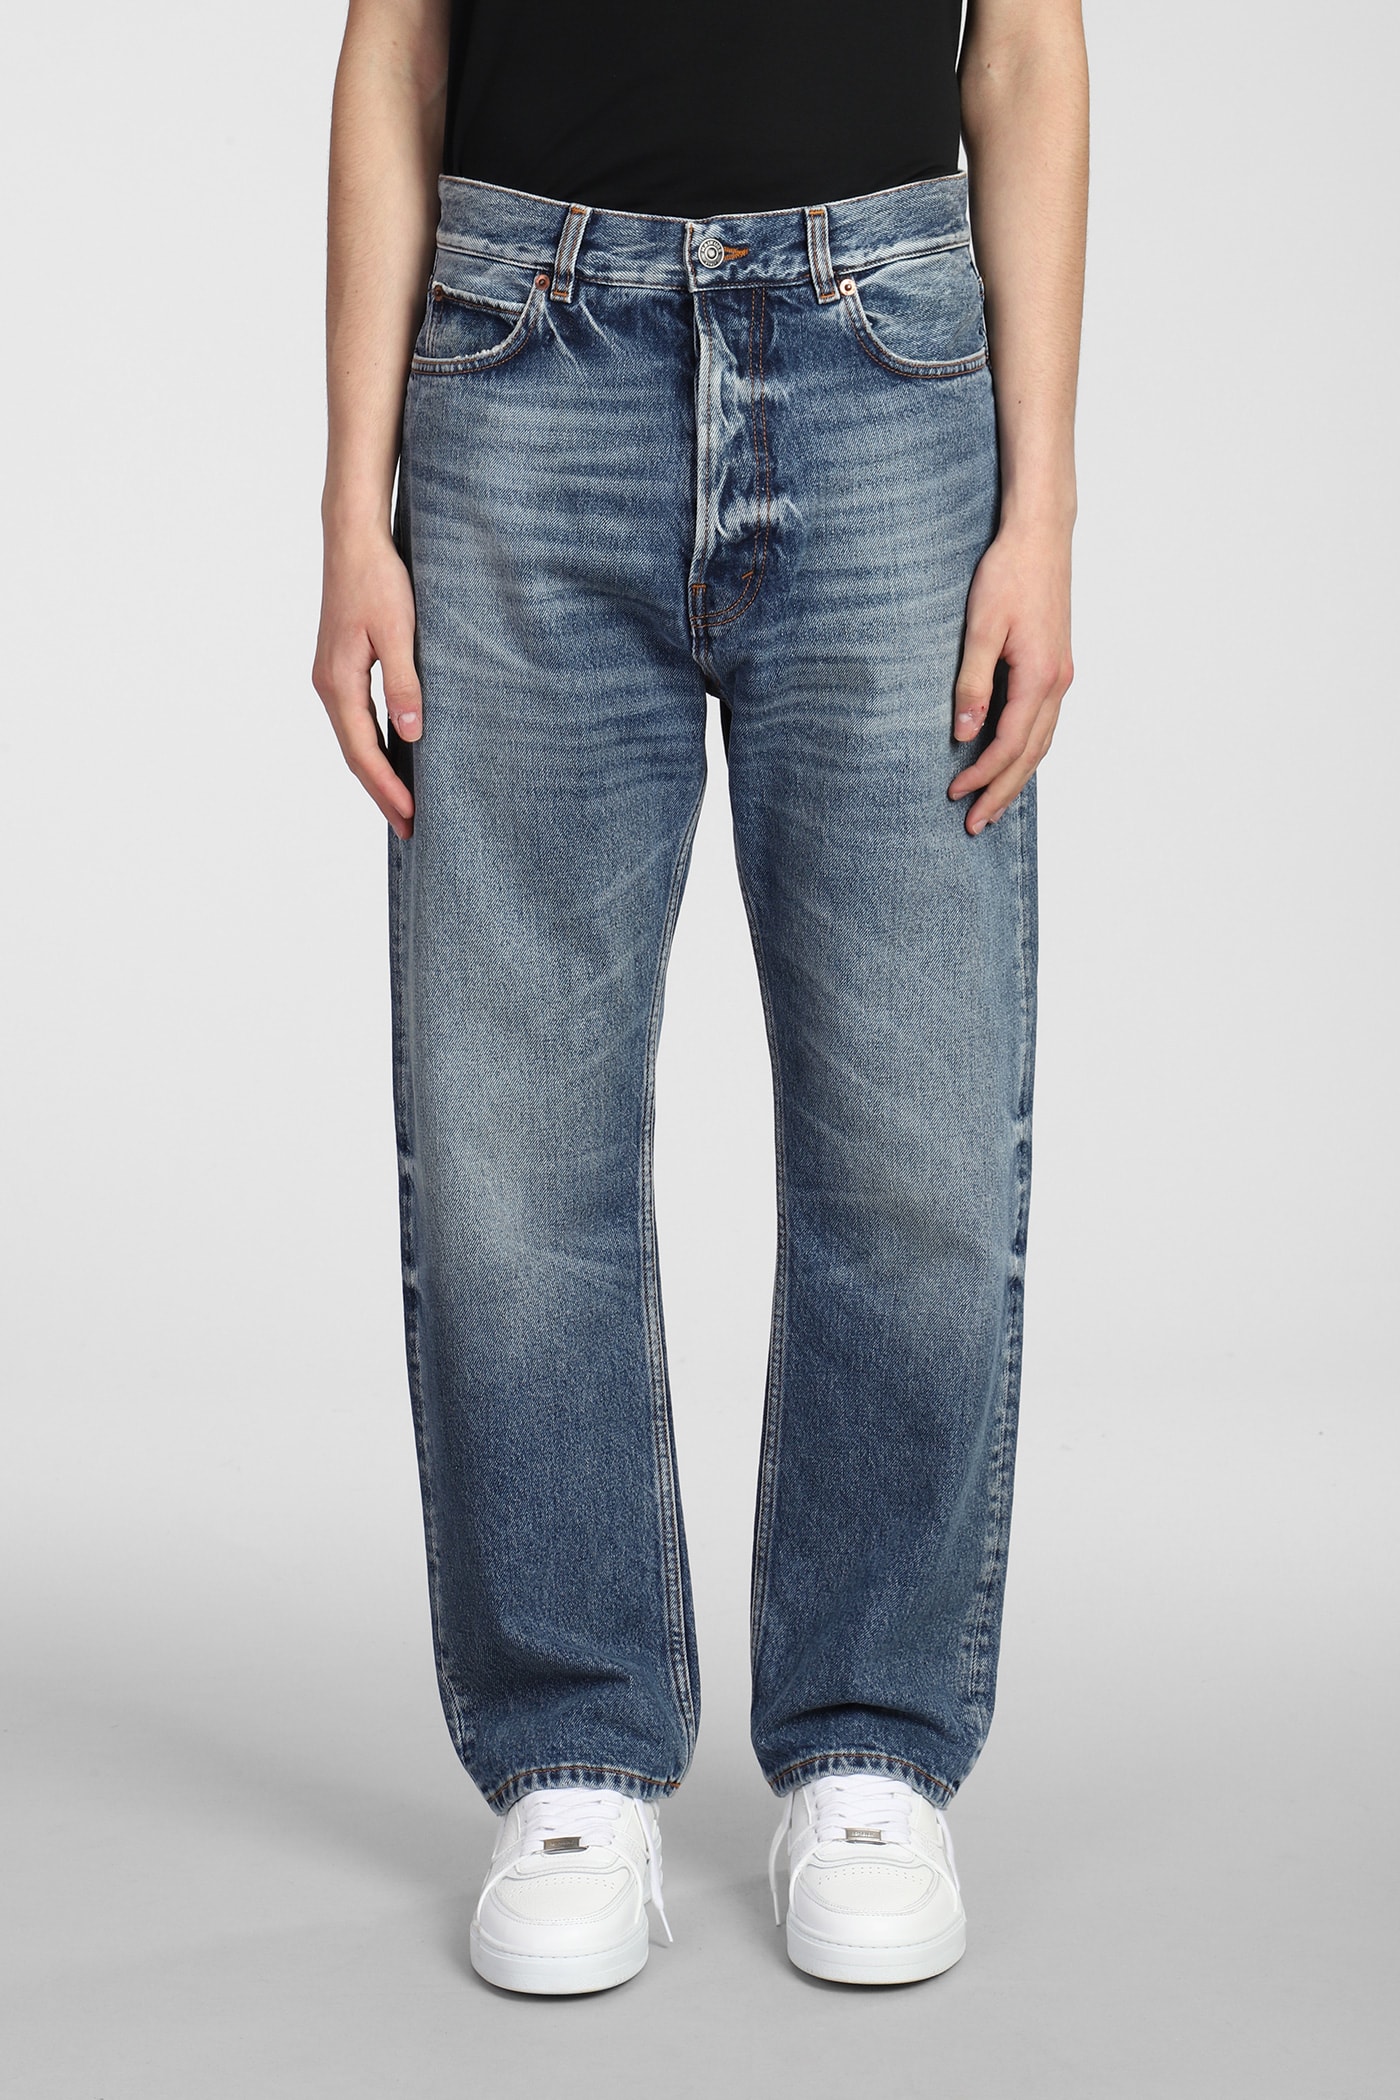 HAIKURE LOUISE JEANS IN BLUE COTTON